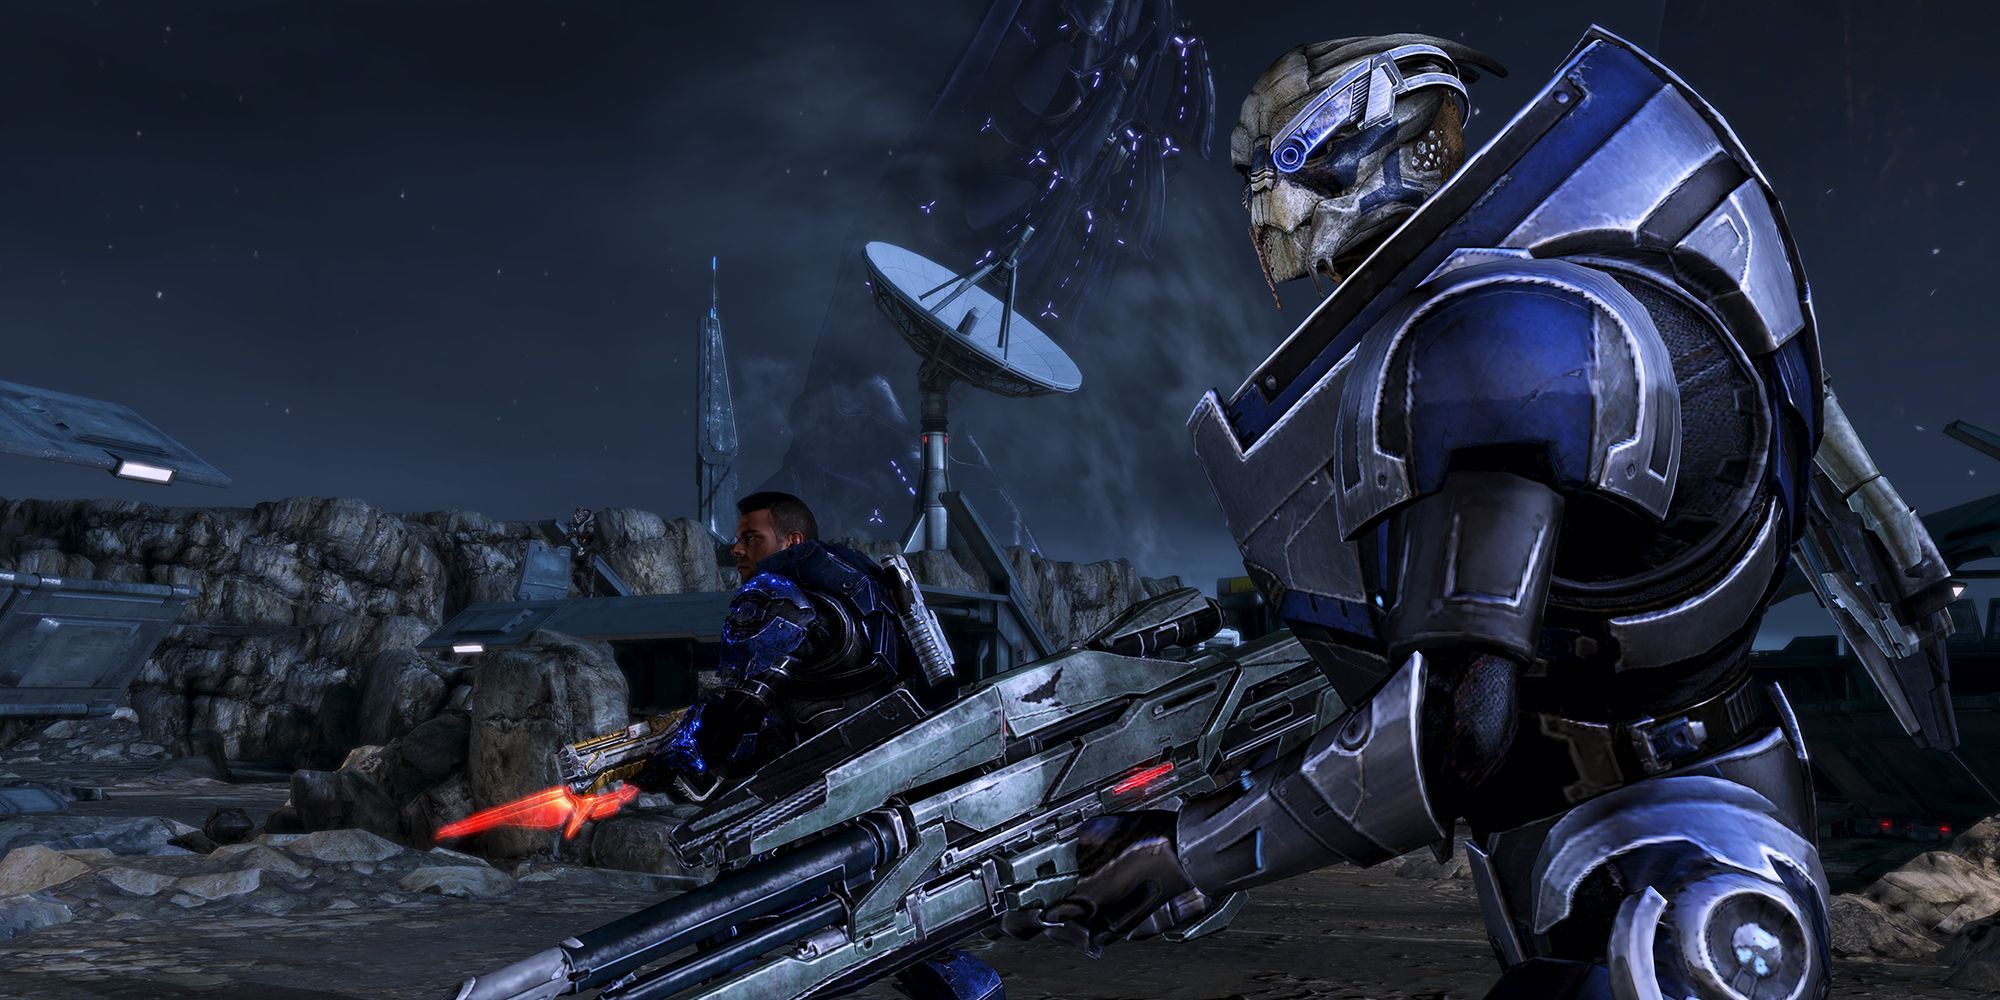 Mass Effect The 5 Most Powerful Normandy Squadmates in the SciFi Universe (& the 5 Weakest)